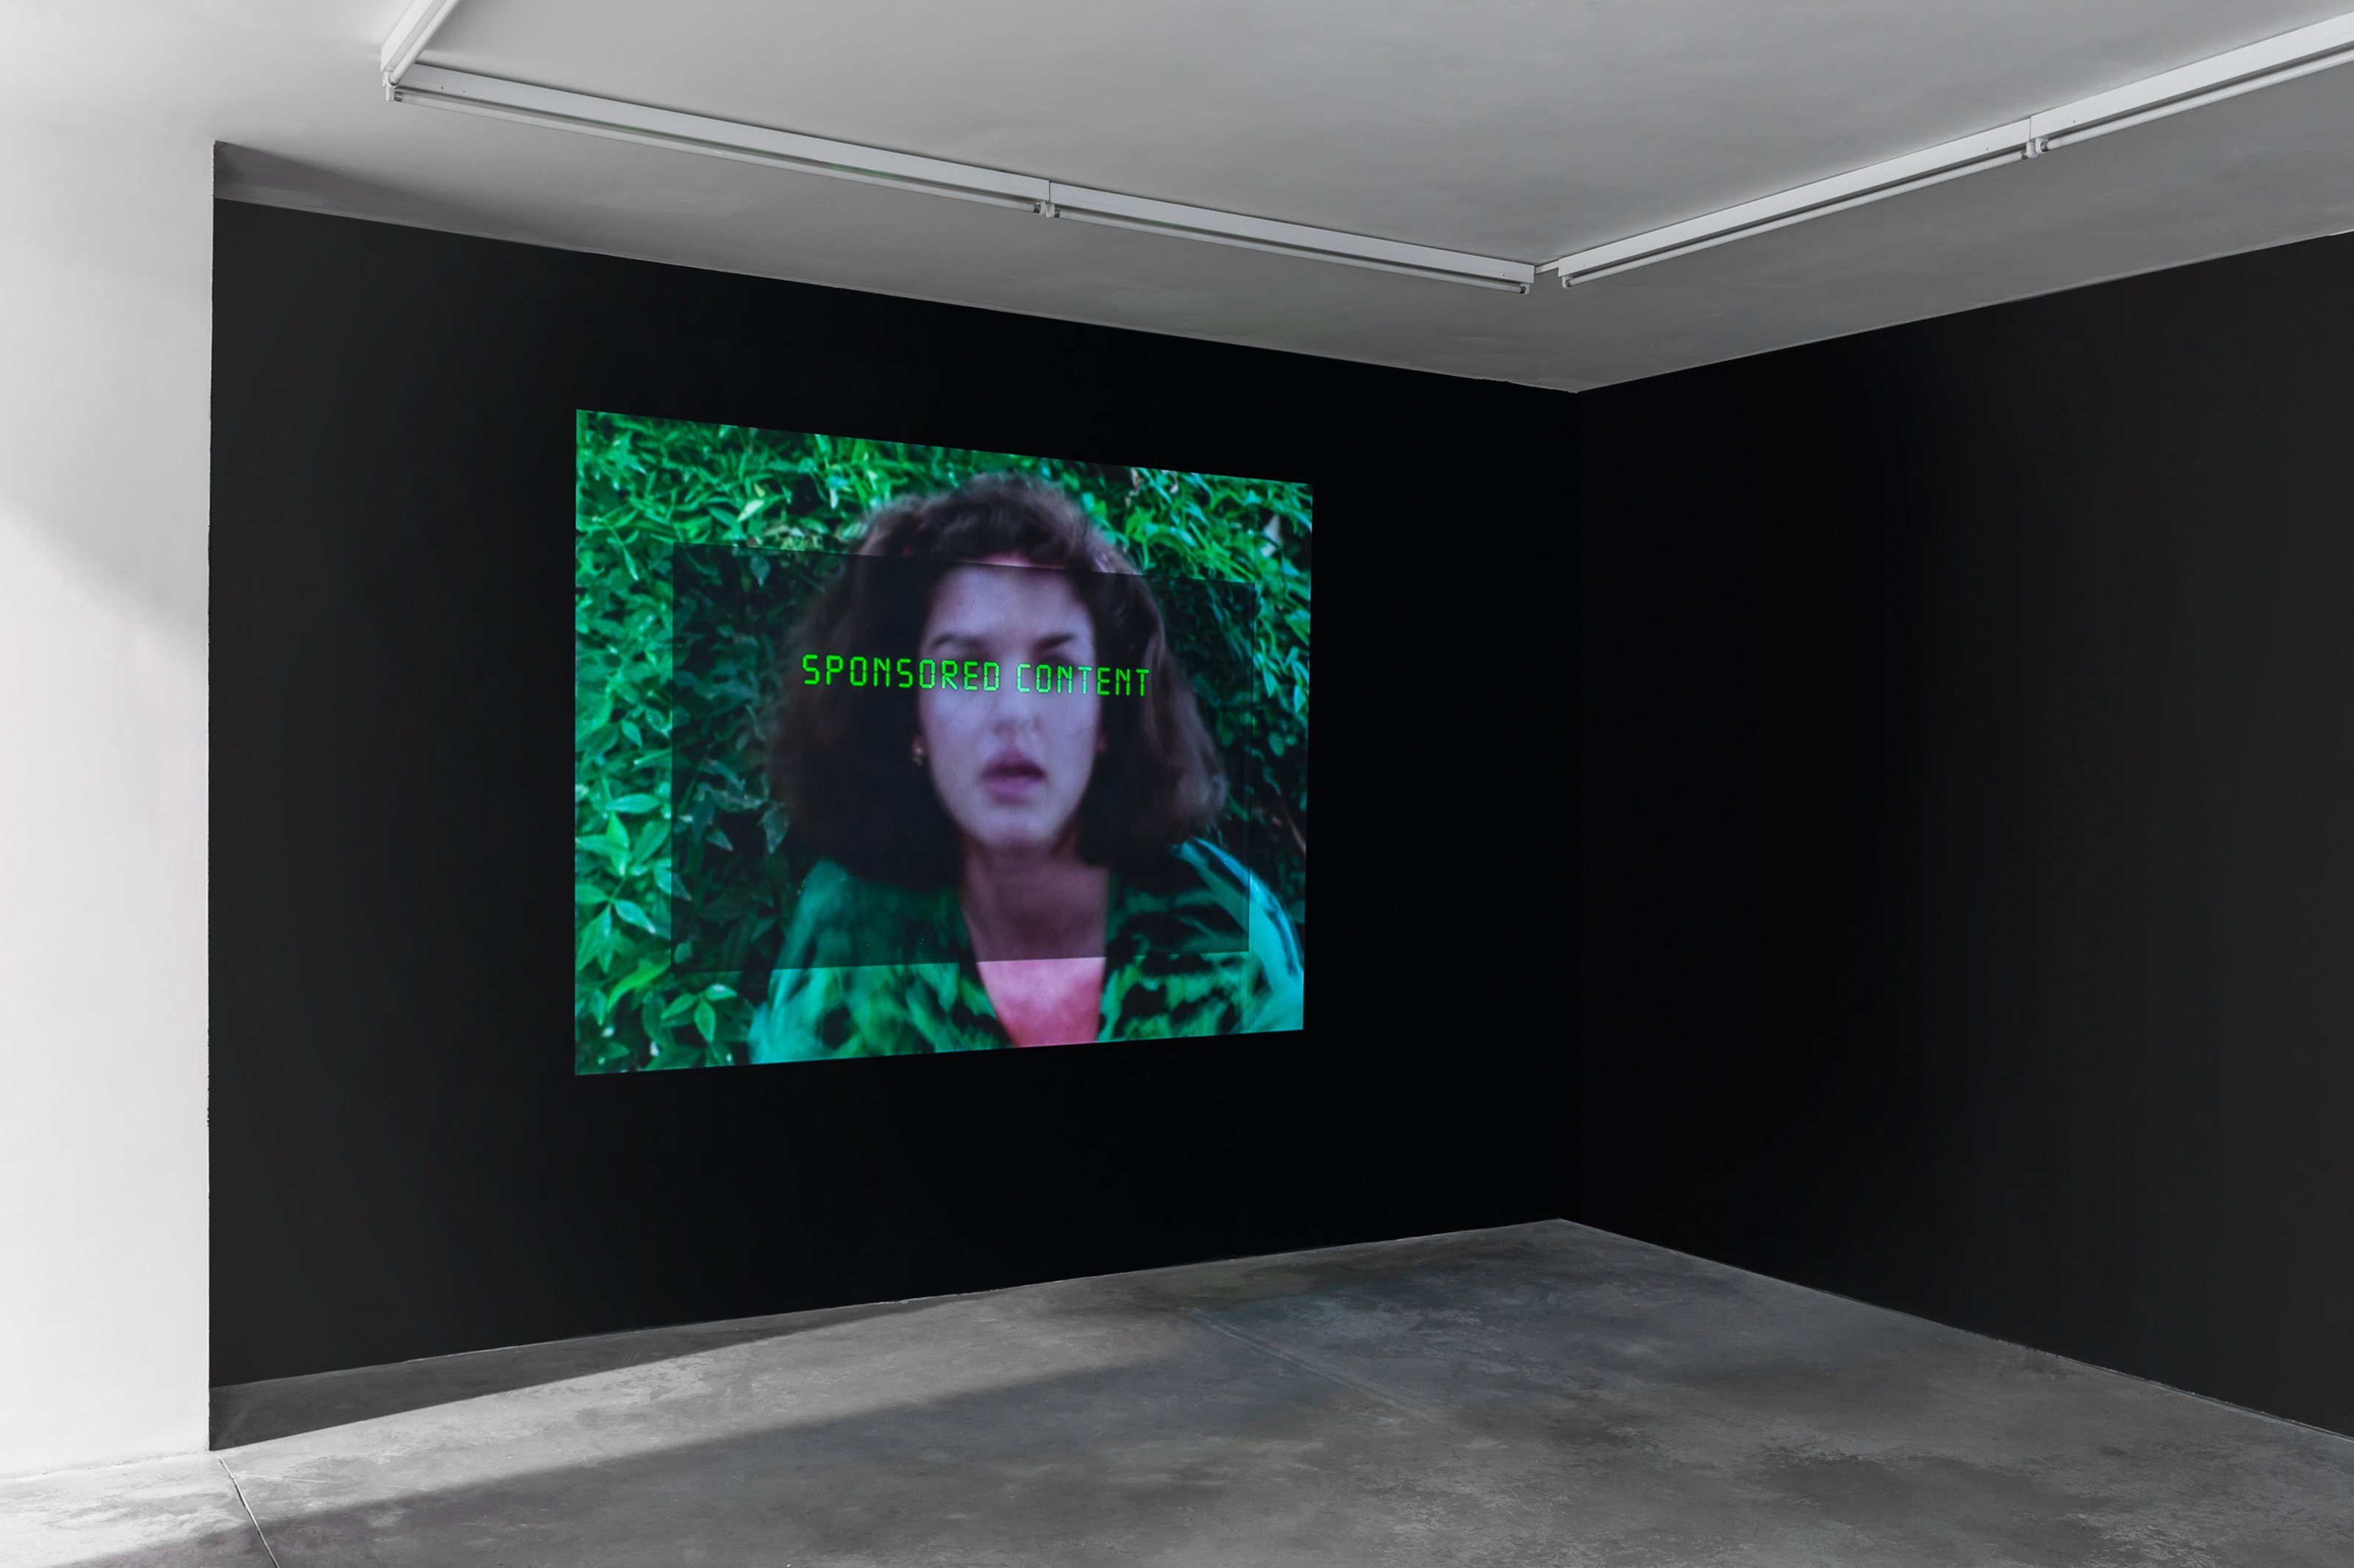 Large wall-mounted screen in an art gallery with black walls and a concrete floor, displaying an image of a black-haired woman in a green outfit with green leaves in the background. The words 'sponsored content' are visible on the screen.